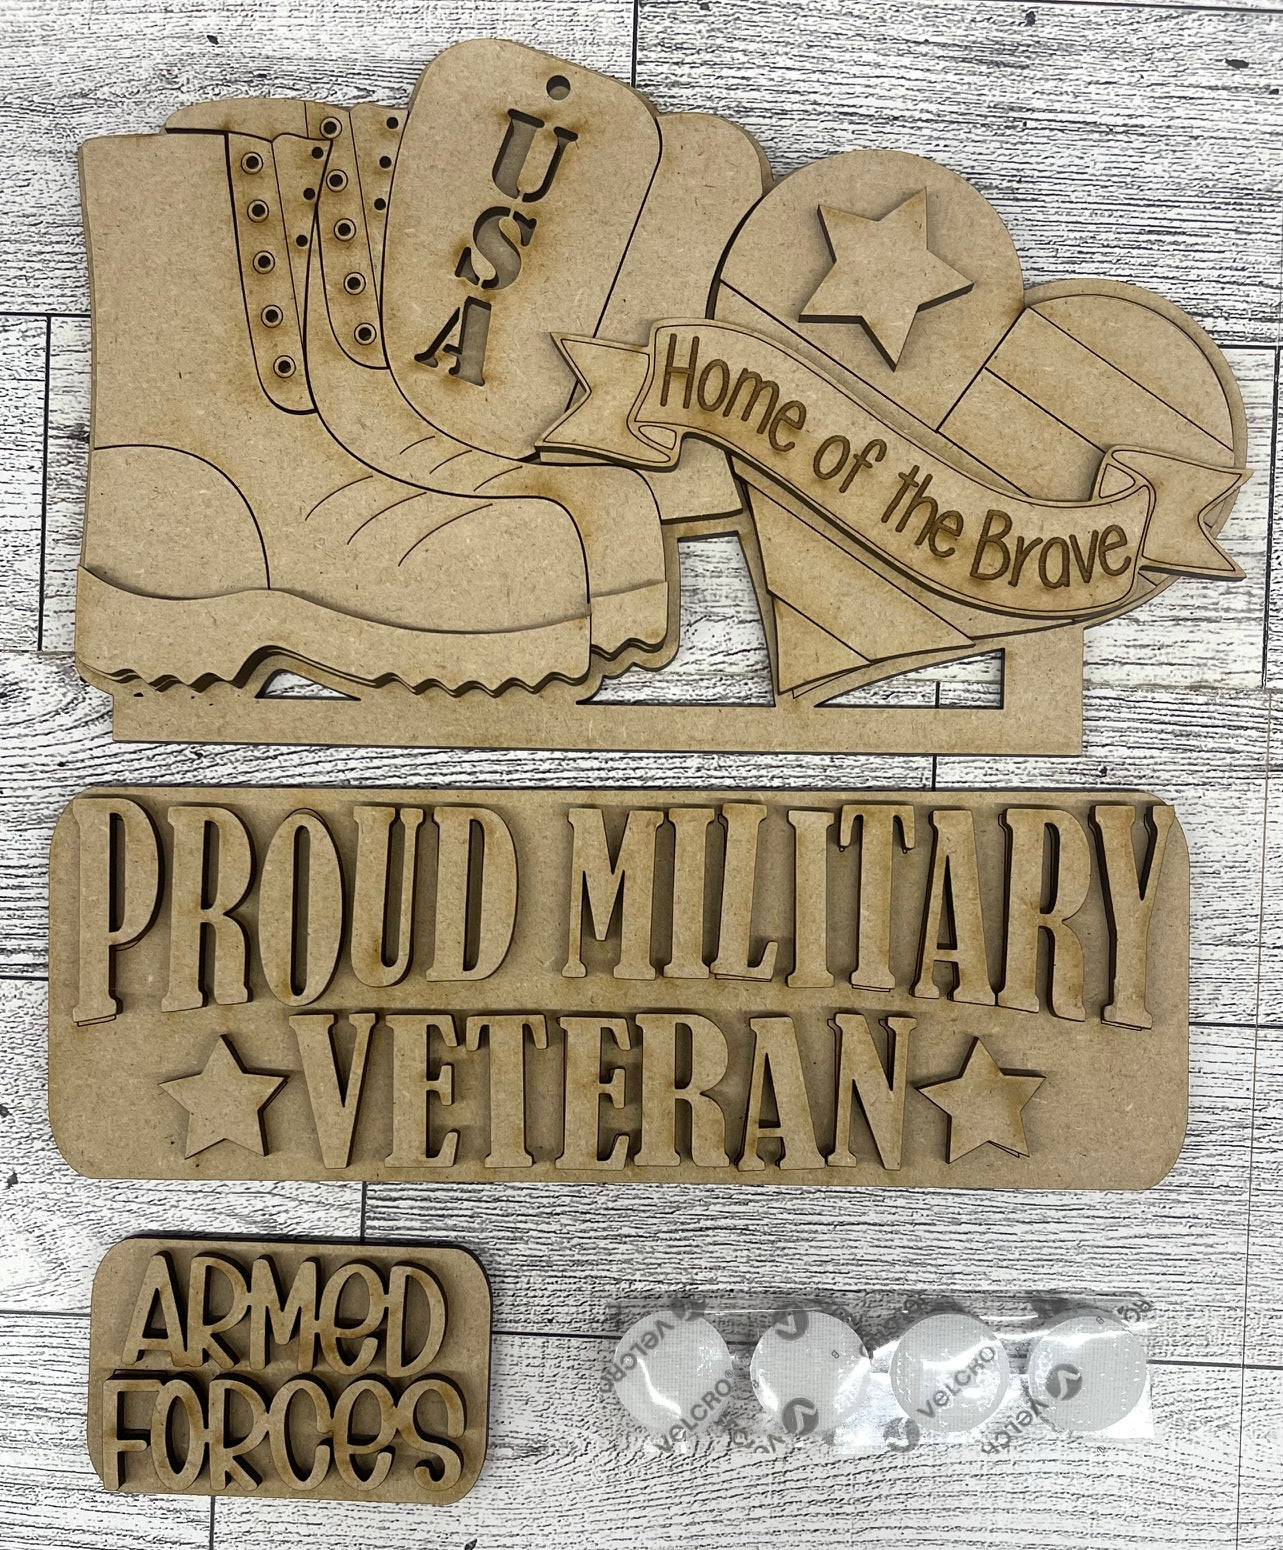 Military Truck Insert cutouts - unpainted wooden cutouts, ready for you to paint